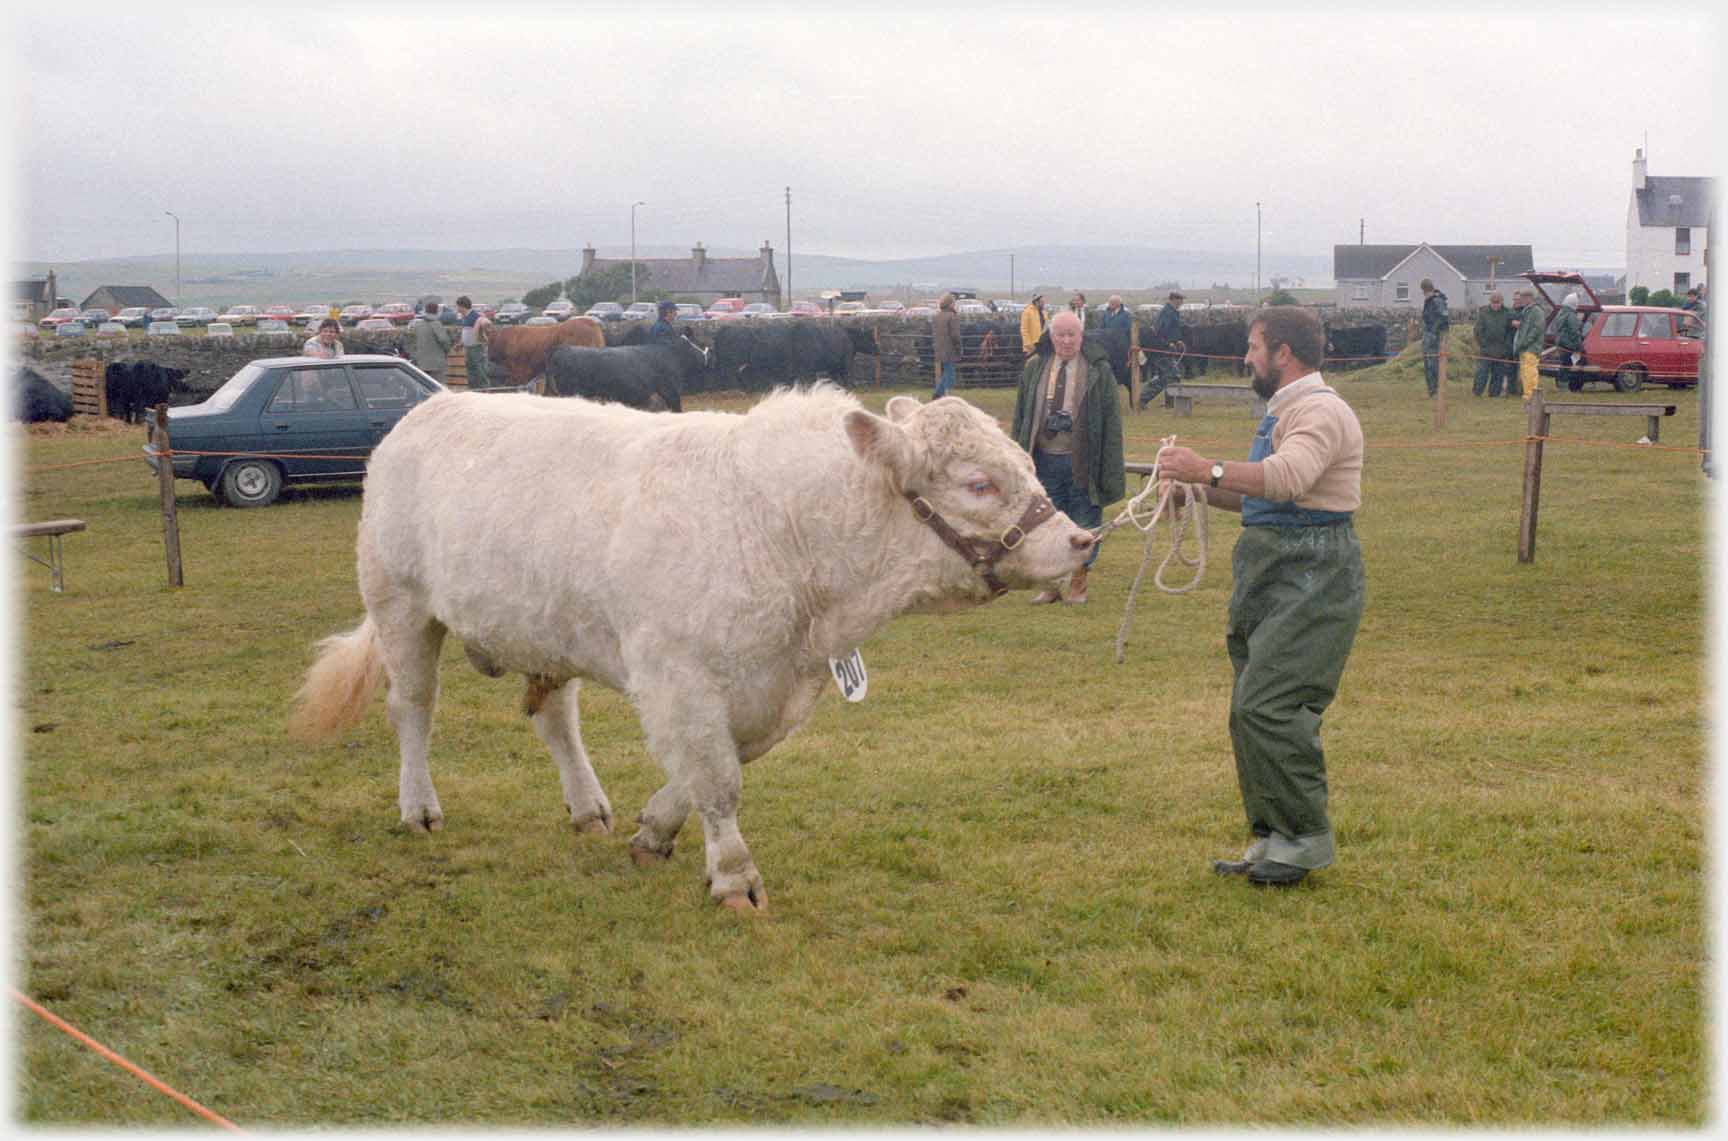 Man with bull in show field.